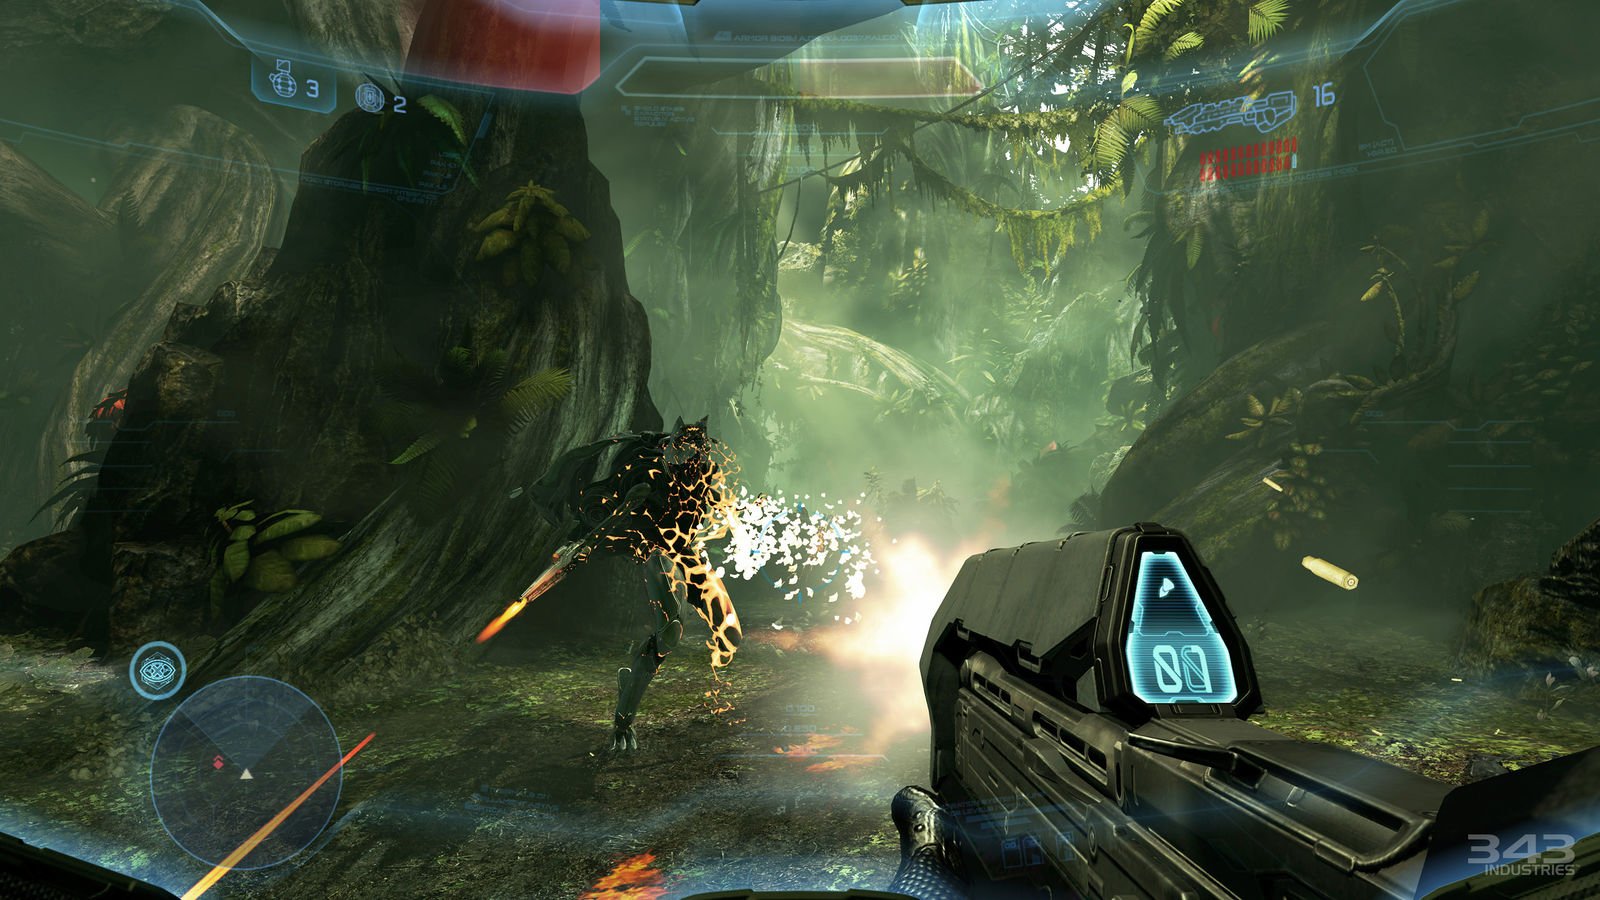 First-person perspective of a player holding a futuristic assault rifle in a lush jungle environment, firing at a Promethean enemy that's disintegrating upon being hit, with a heads-up display showing health, ammunition, and radar.